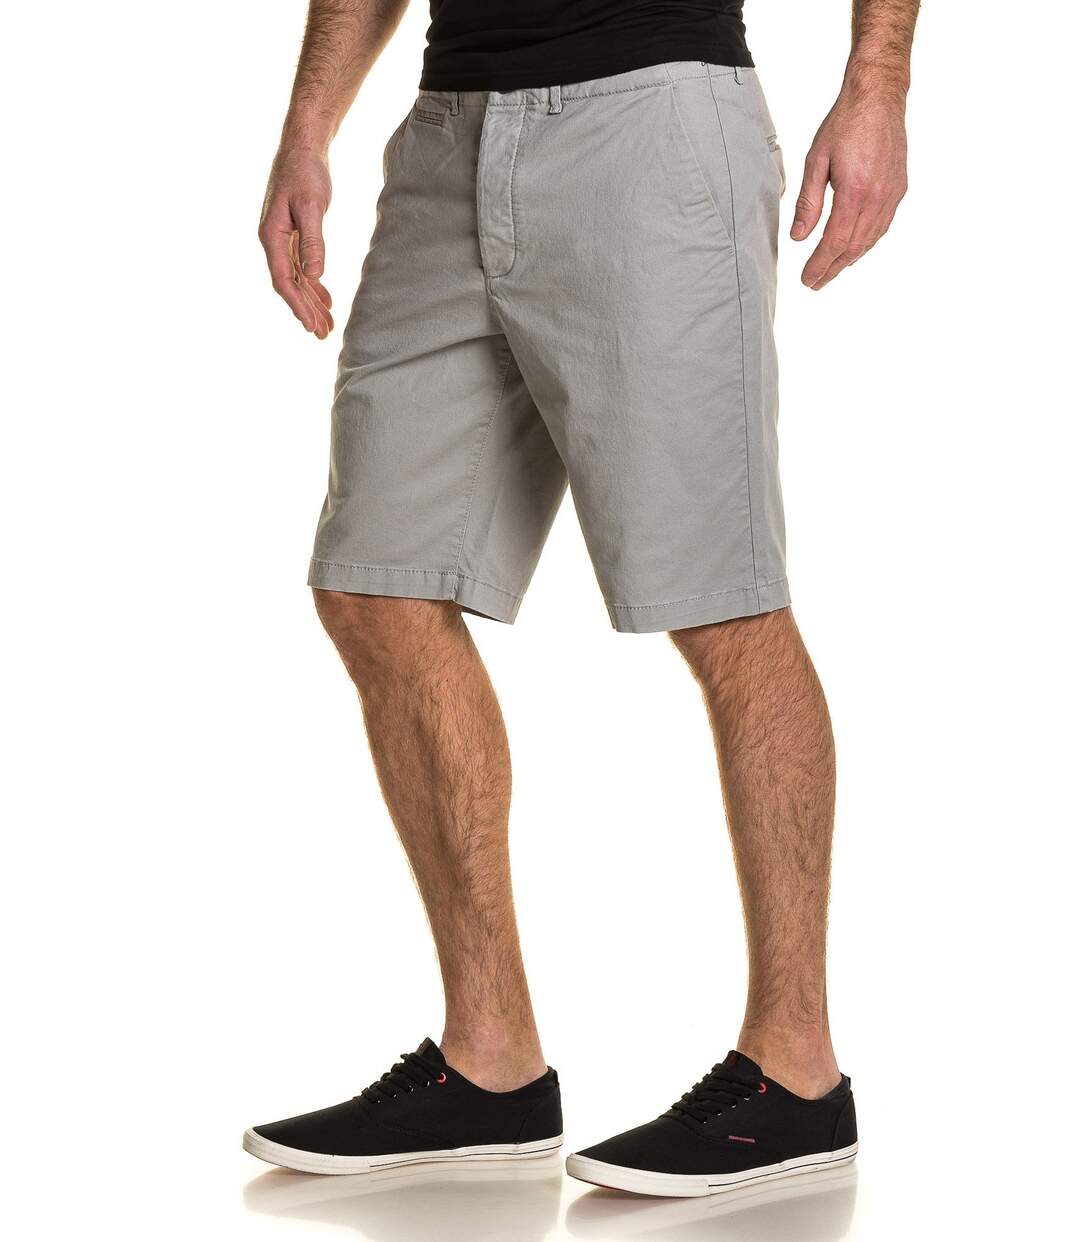 Short homme gris clair chino